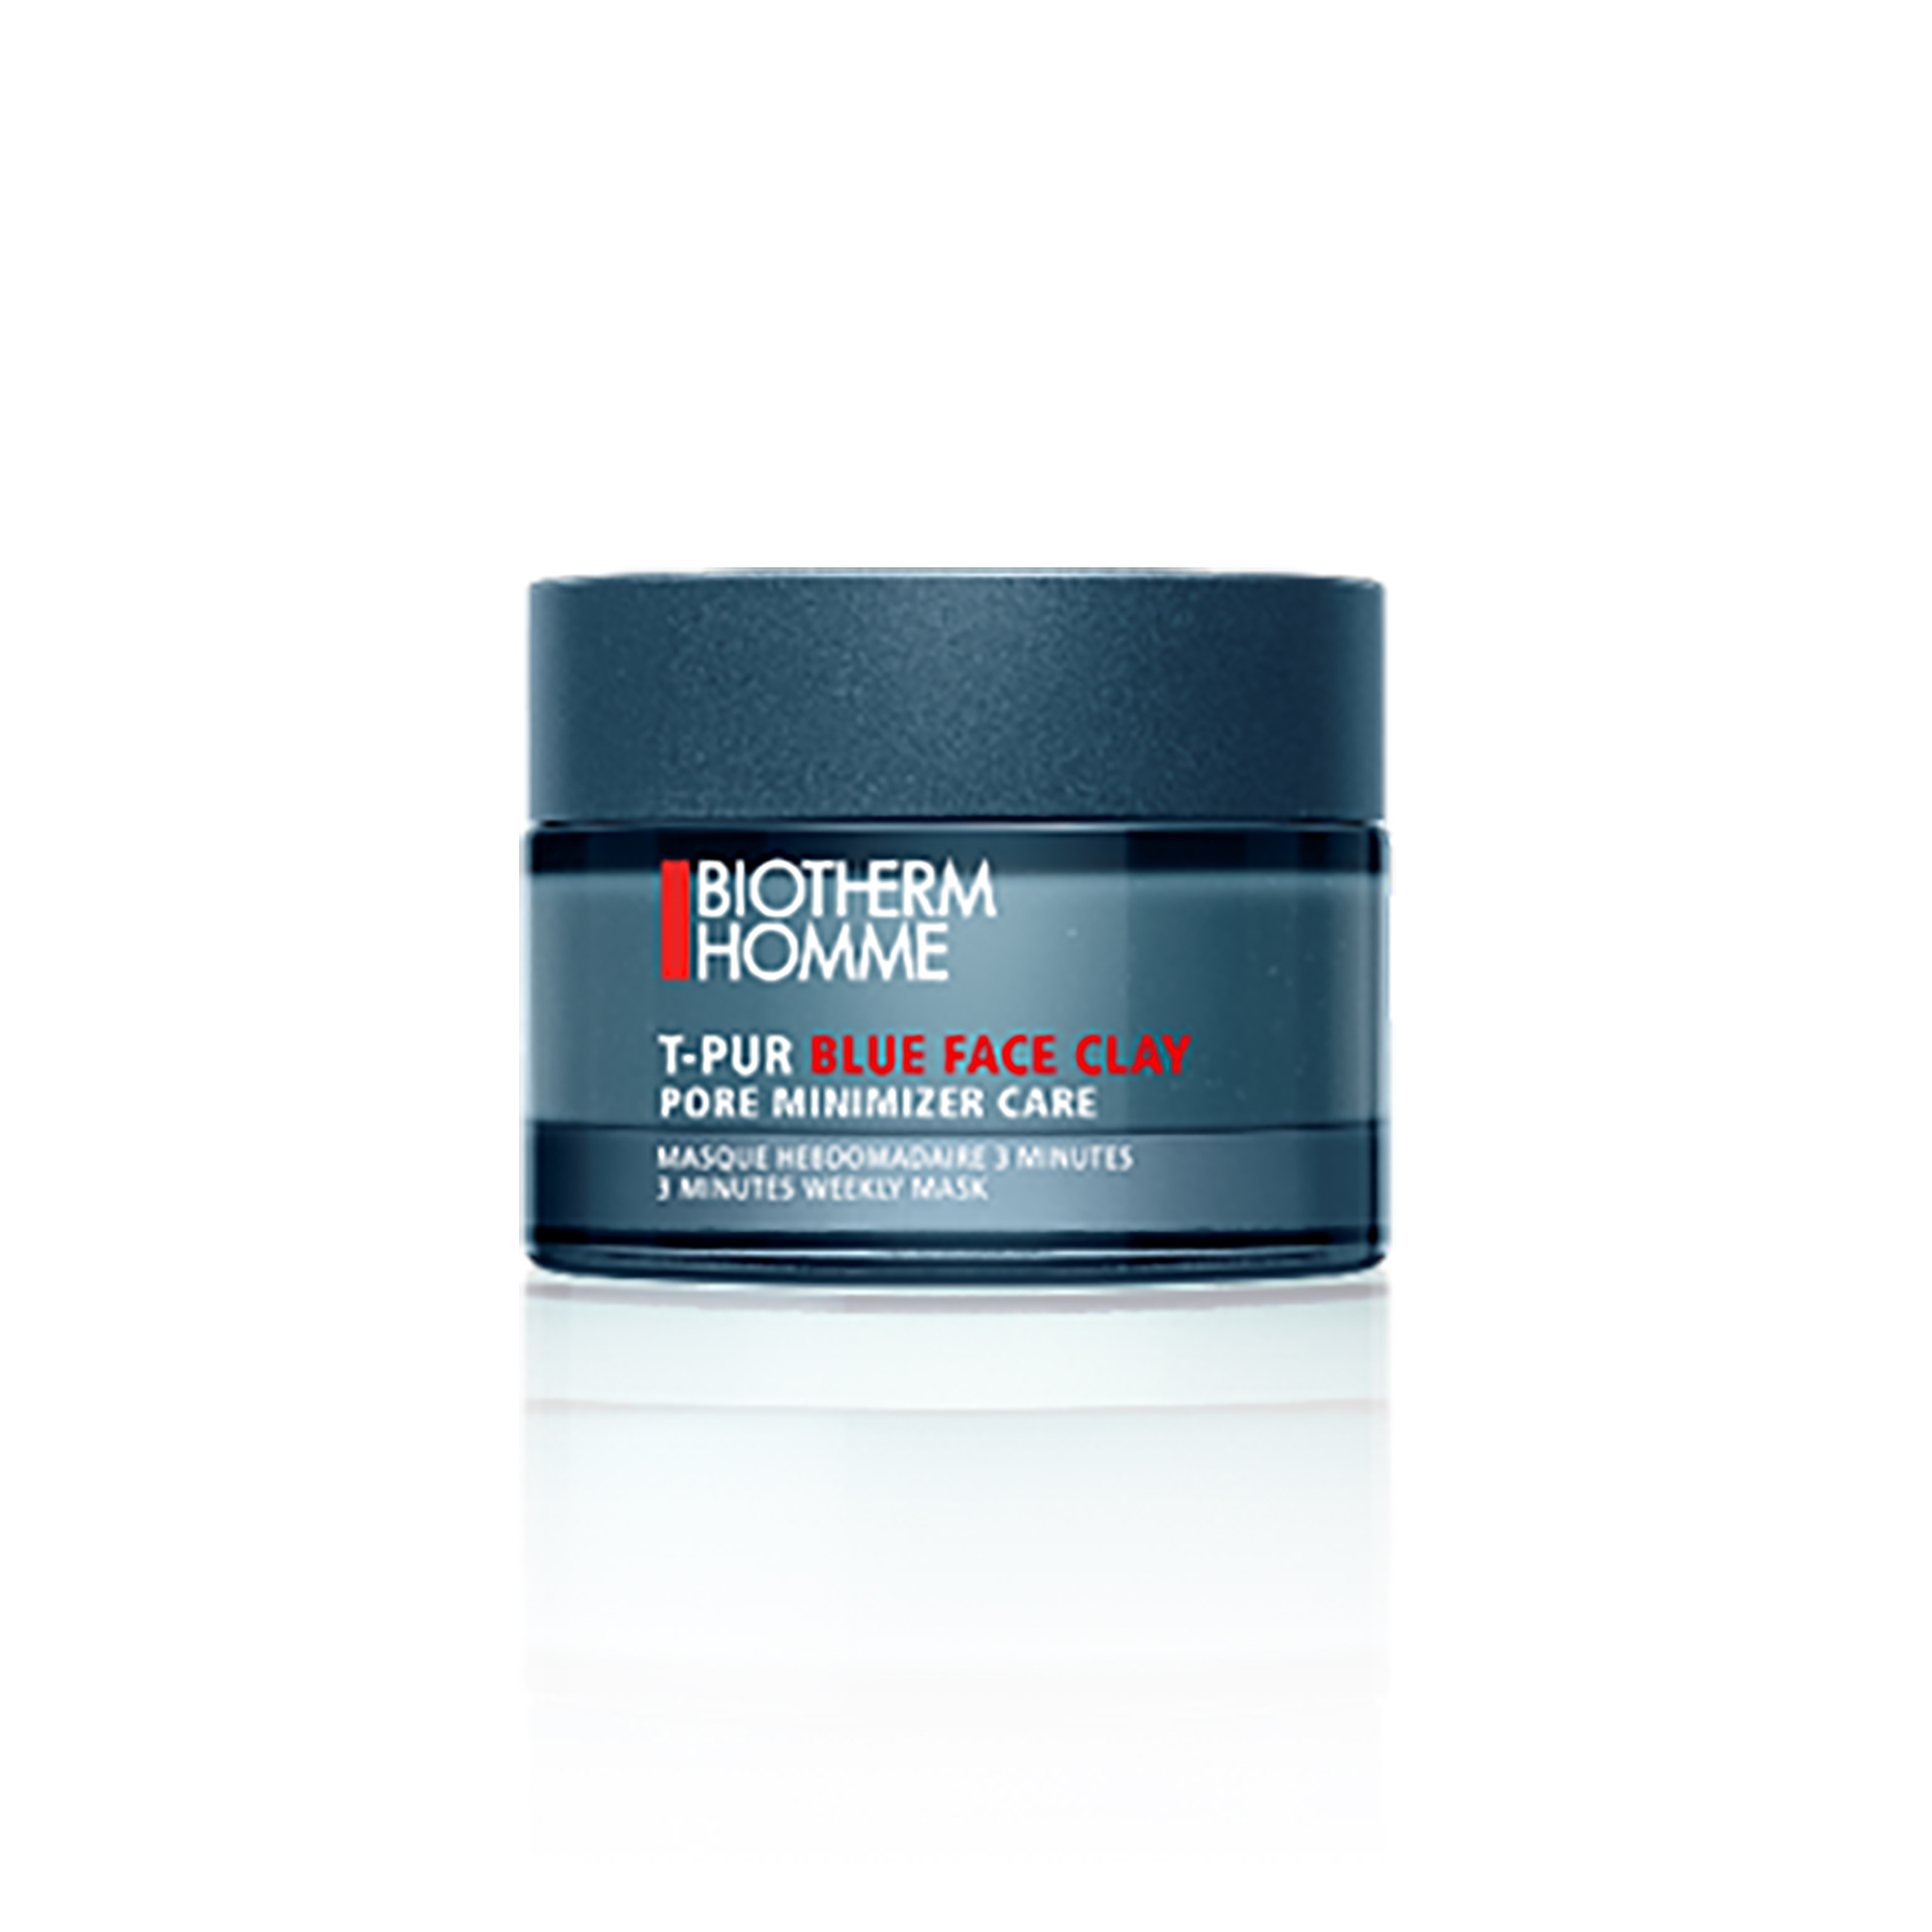  Homme T-Pur Blue Face Clay Mask